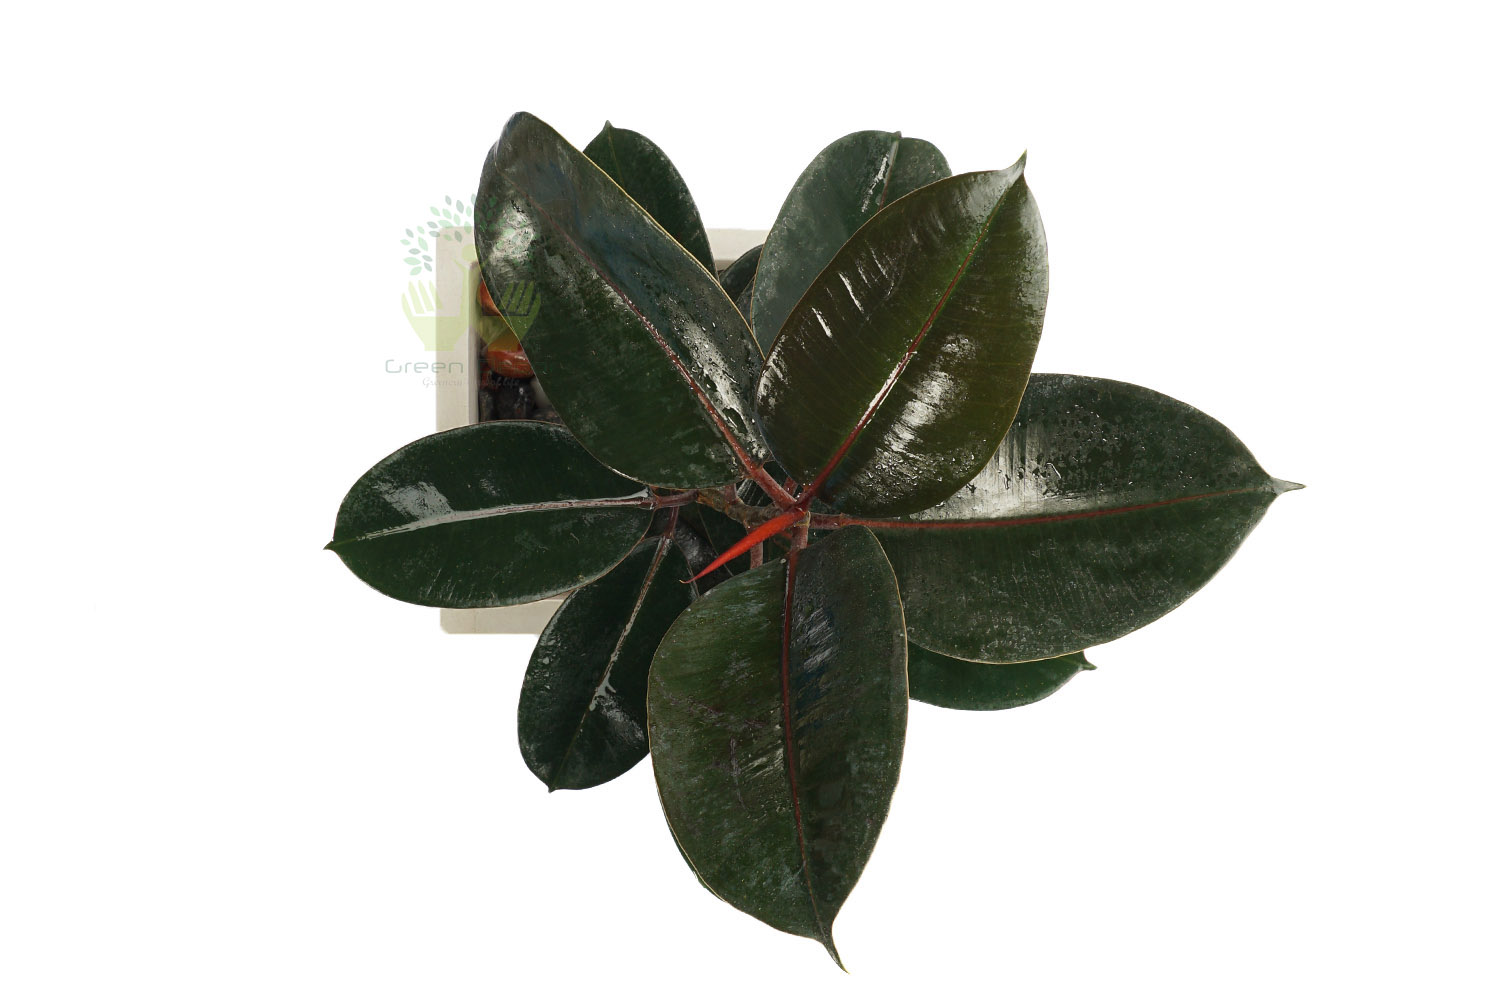 Buy Rubber Plants , White Pots and seeds in Delhi NCR by the best online nursery shop Greendecor.